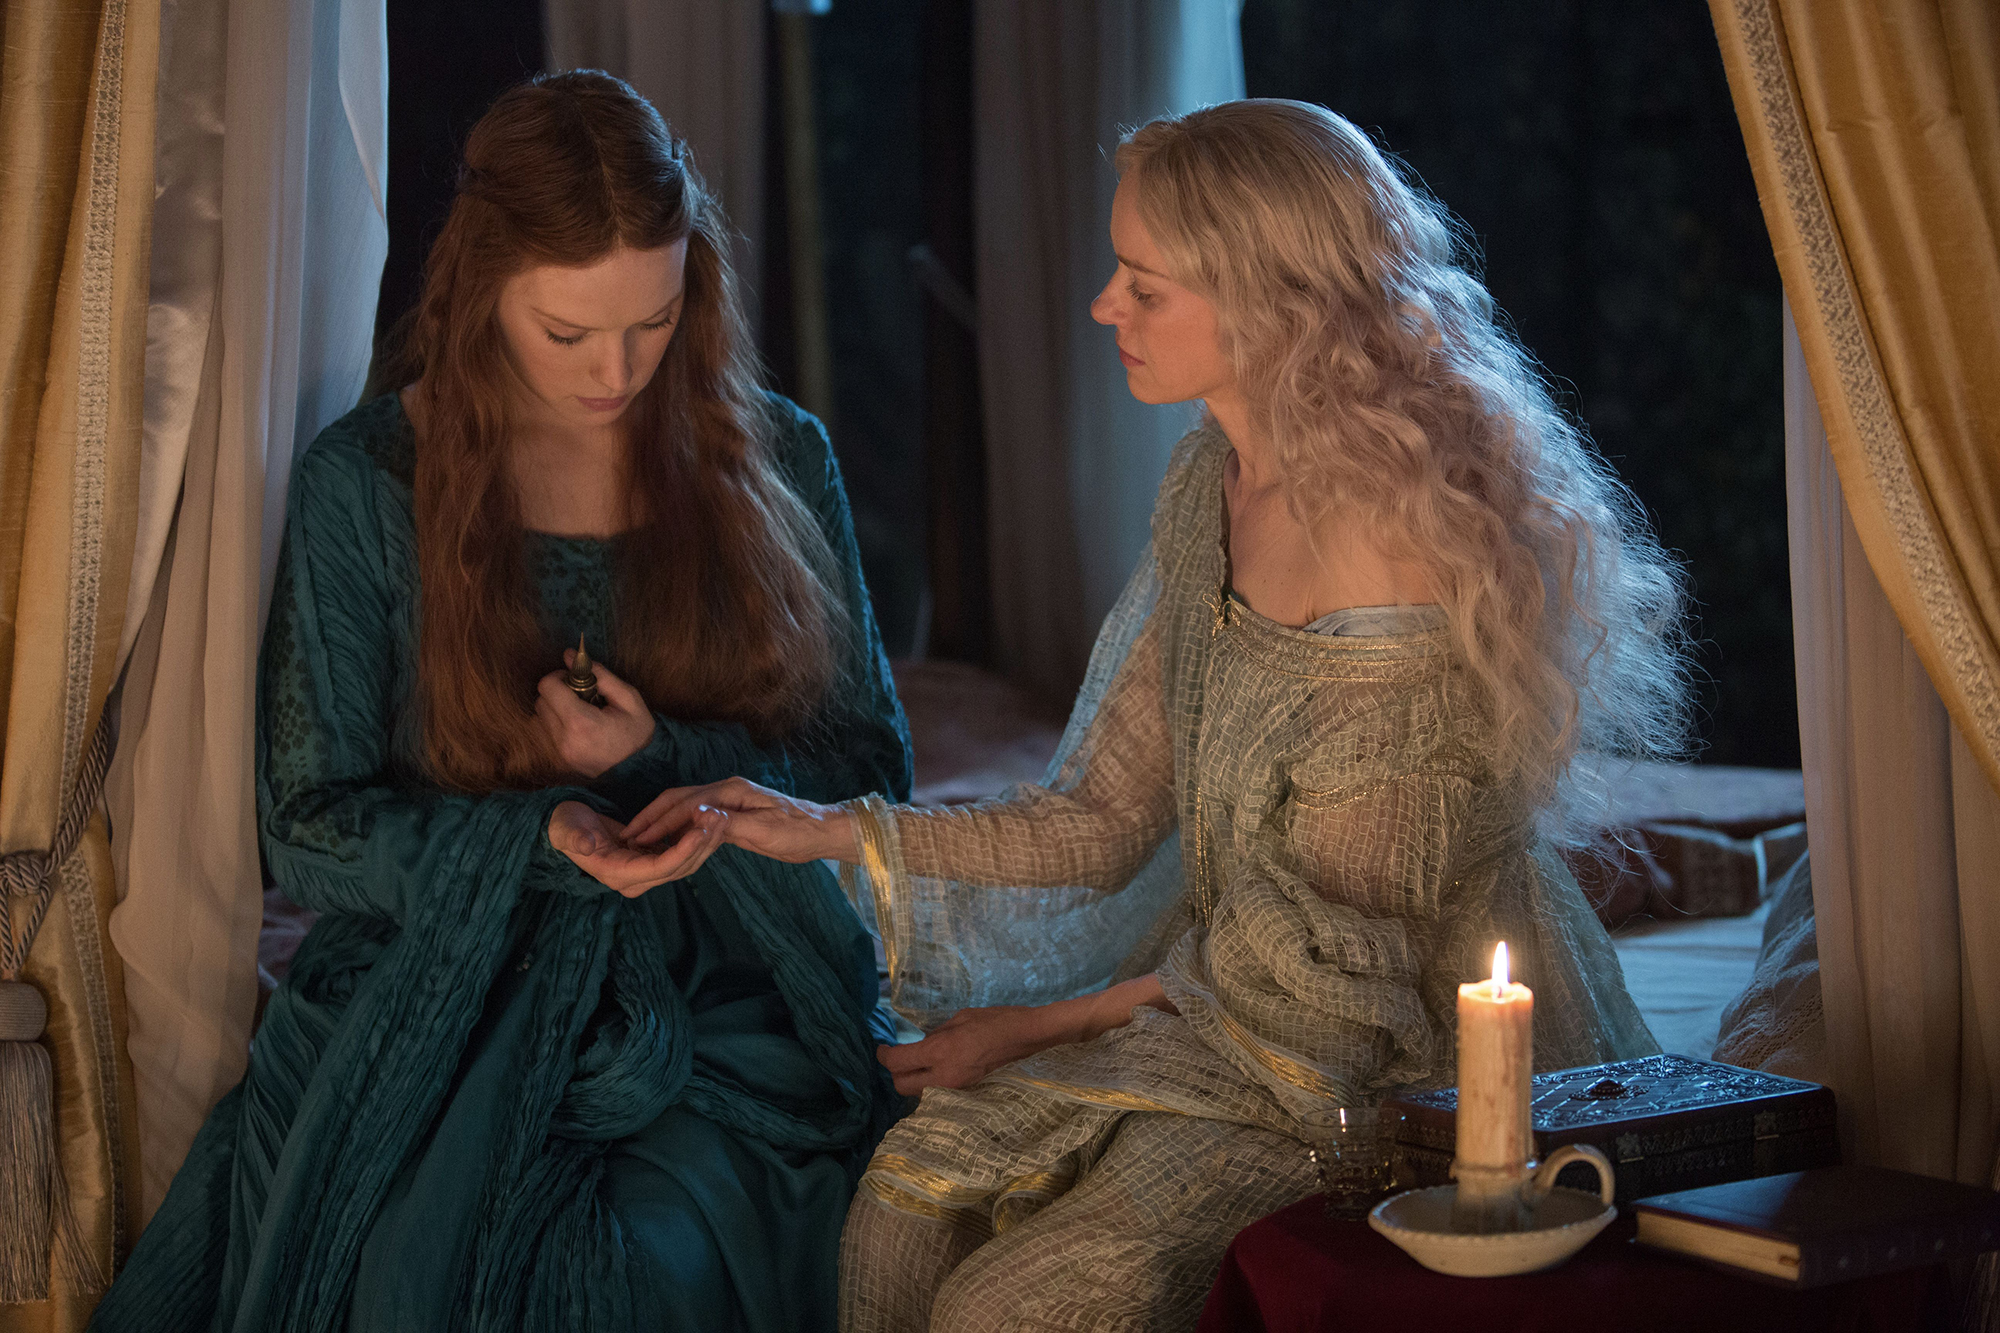 Daisy Ridley and Naomi Watts in Ophelia